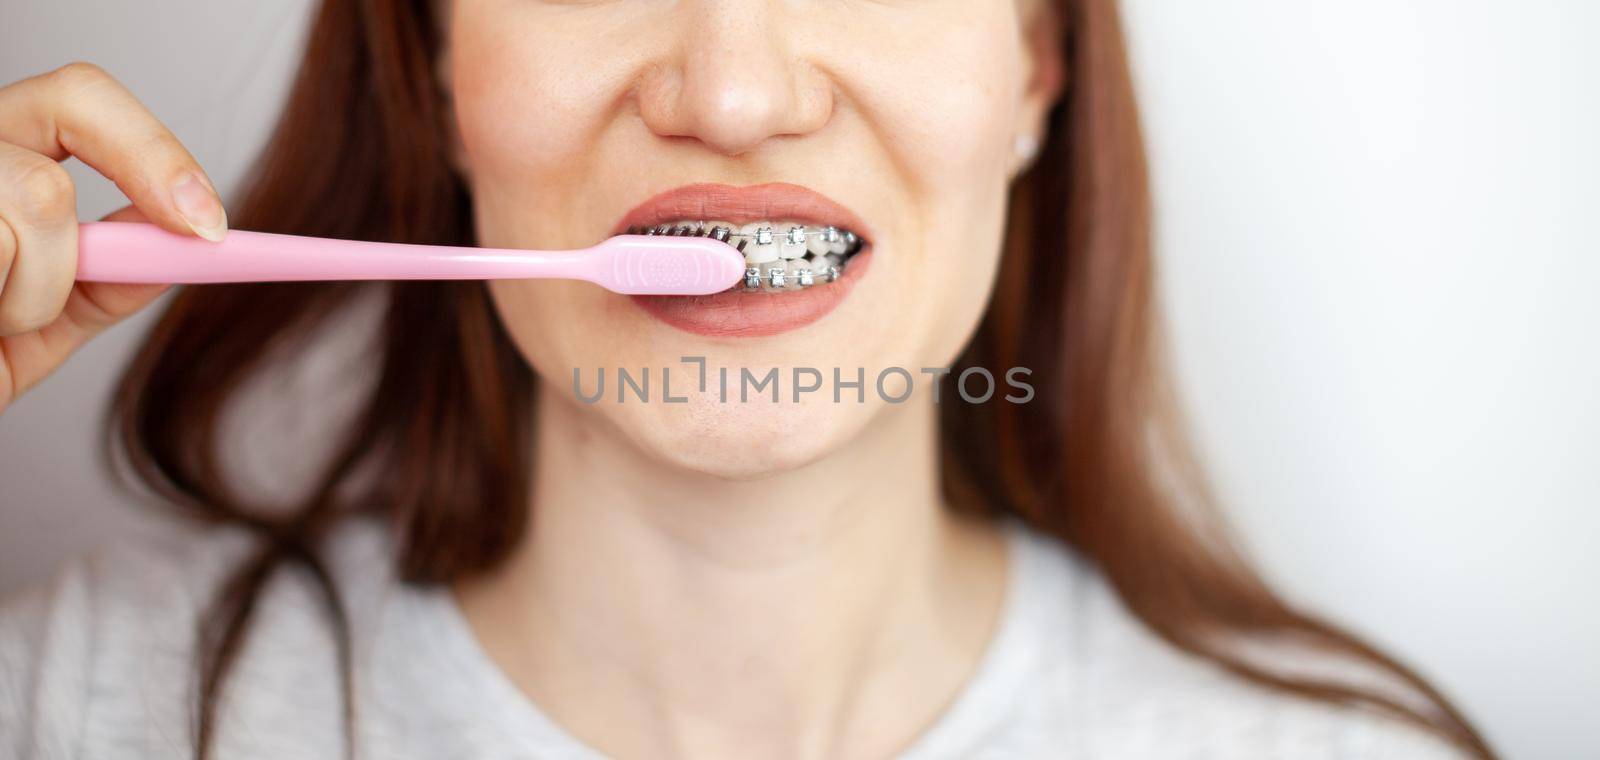 A girl with braces on her white teeth is brushing her teeth with a toothbrush. Straightening and dental hygiene. Dental care.